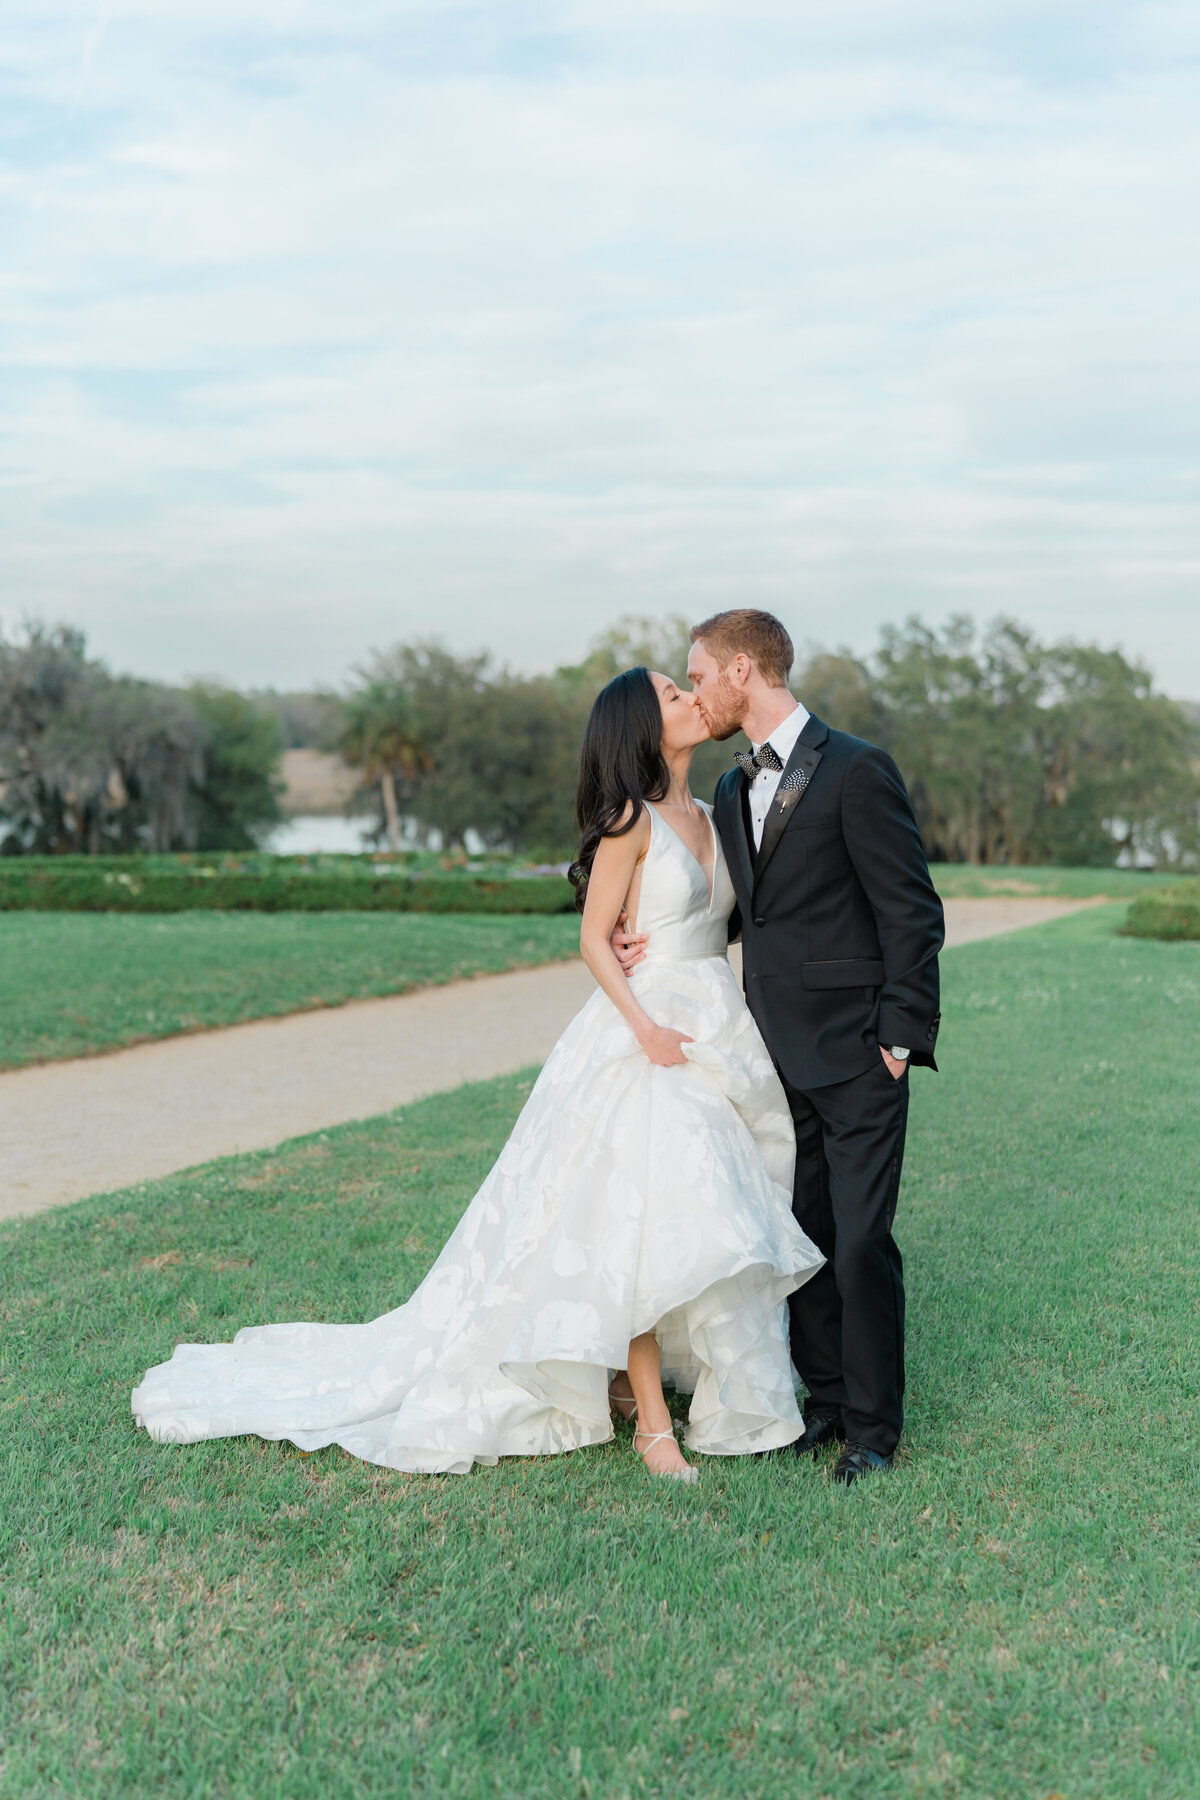 Sunset wedding day portraits. Winter wedding at Middleton Place. Bride and groom kiss on green grass with the last bits of sun warmly hitting them. Charleston destination wedding photographer.